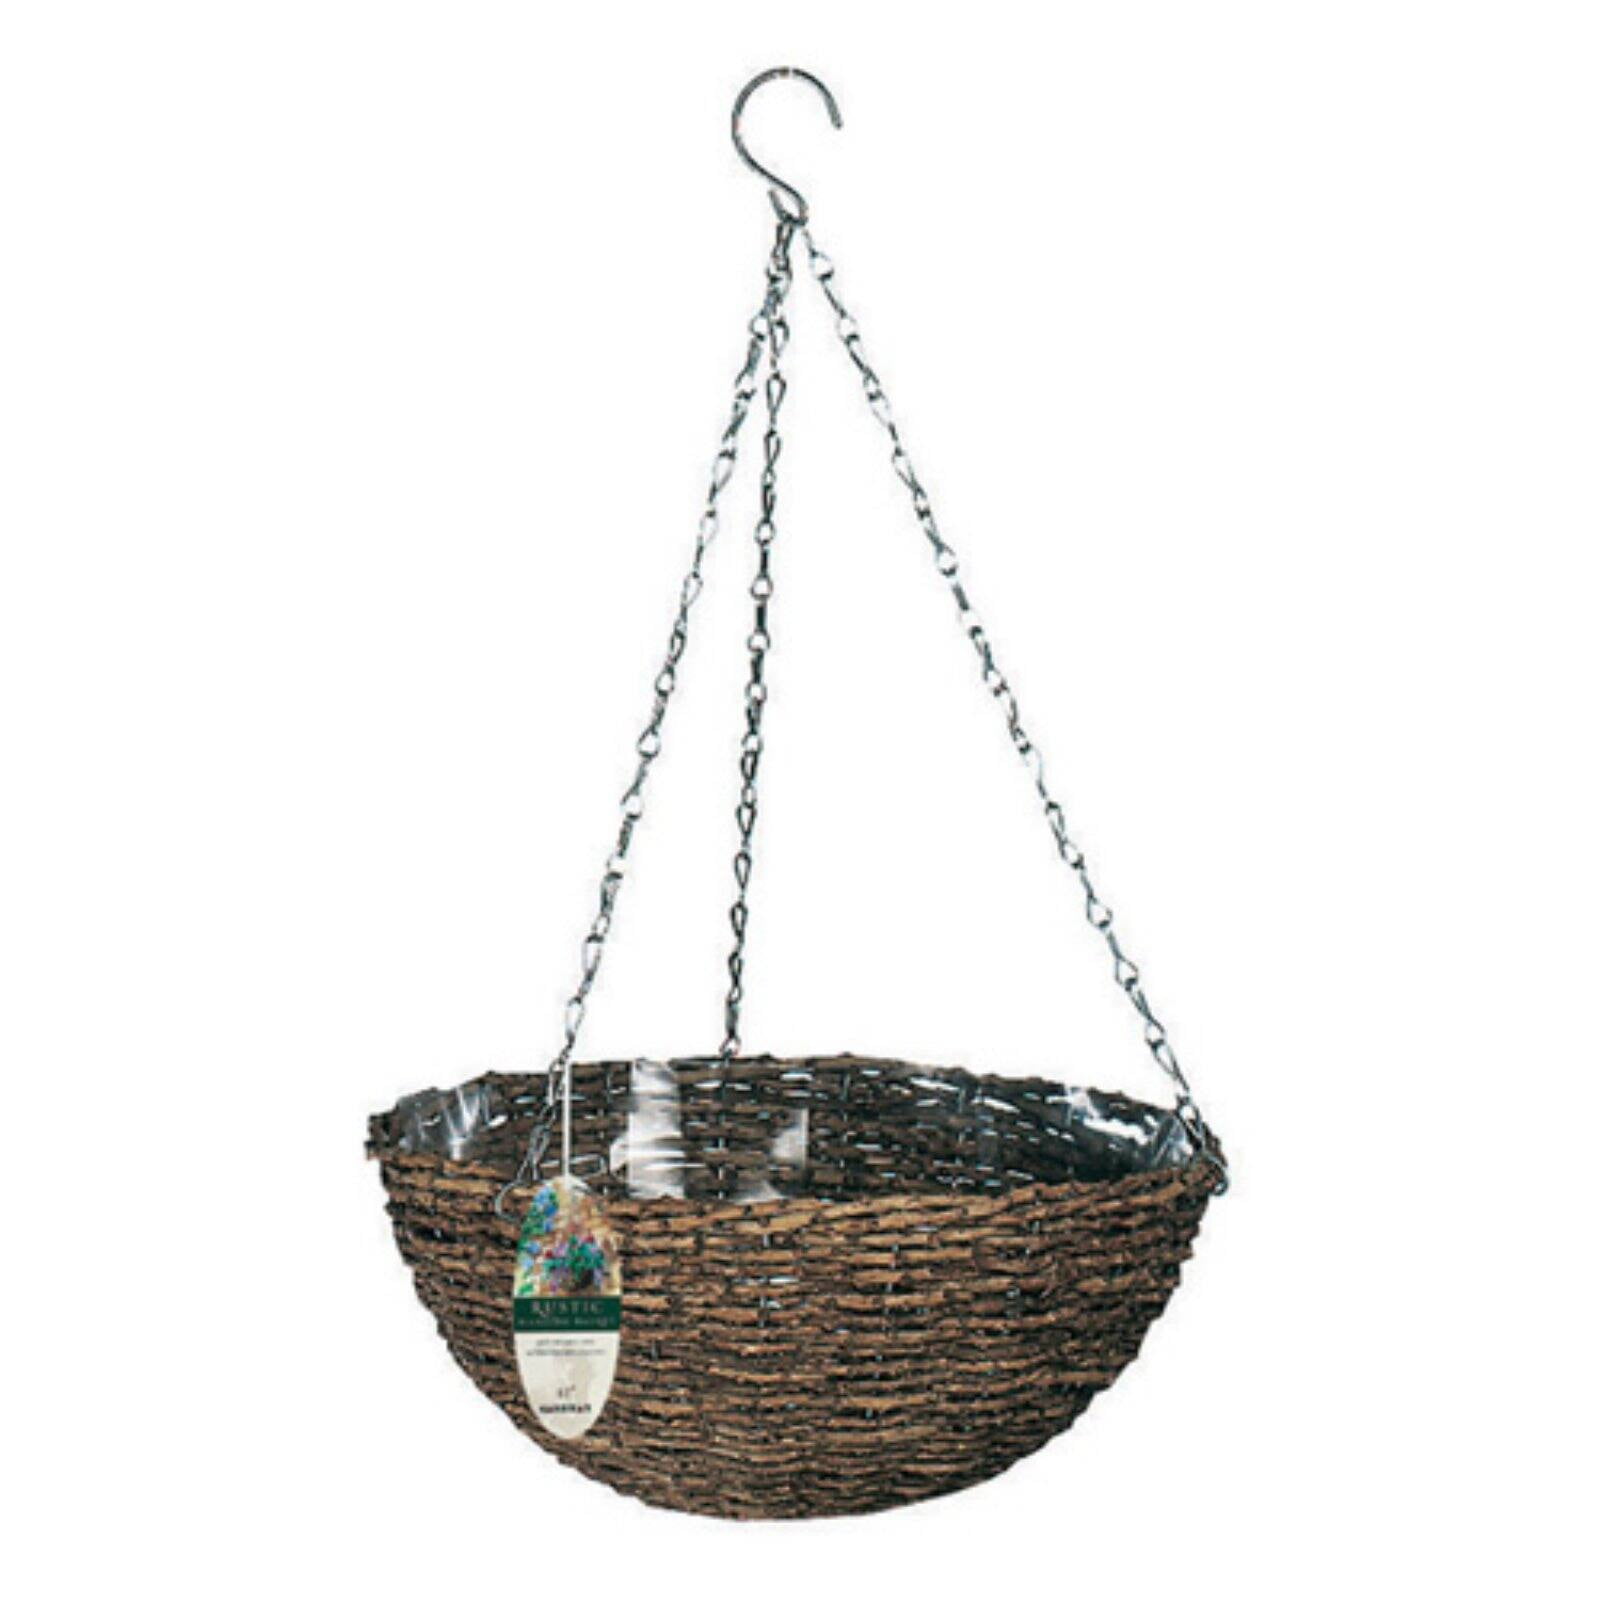 WILLOW HANGING BASKETS CONE NATURAL GREY BROWN RATTAN PLANTERS 12" 14"